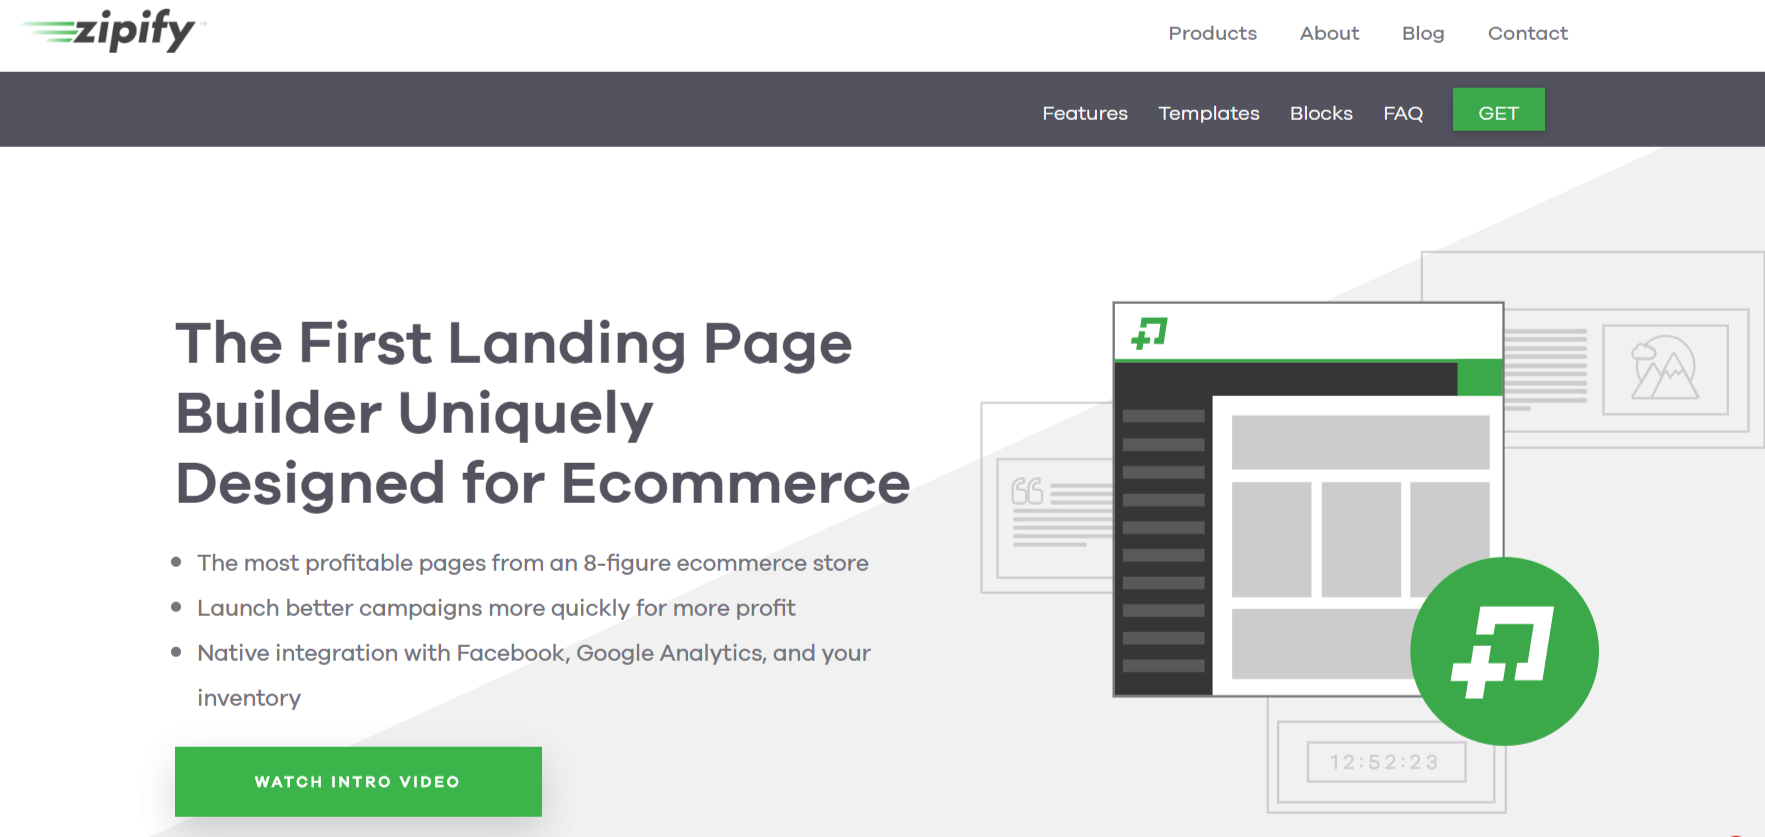 Zipify Review -The First Landing Page Builder for Ecommerce